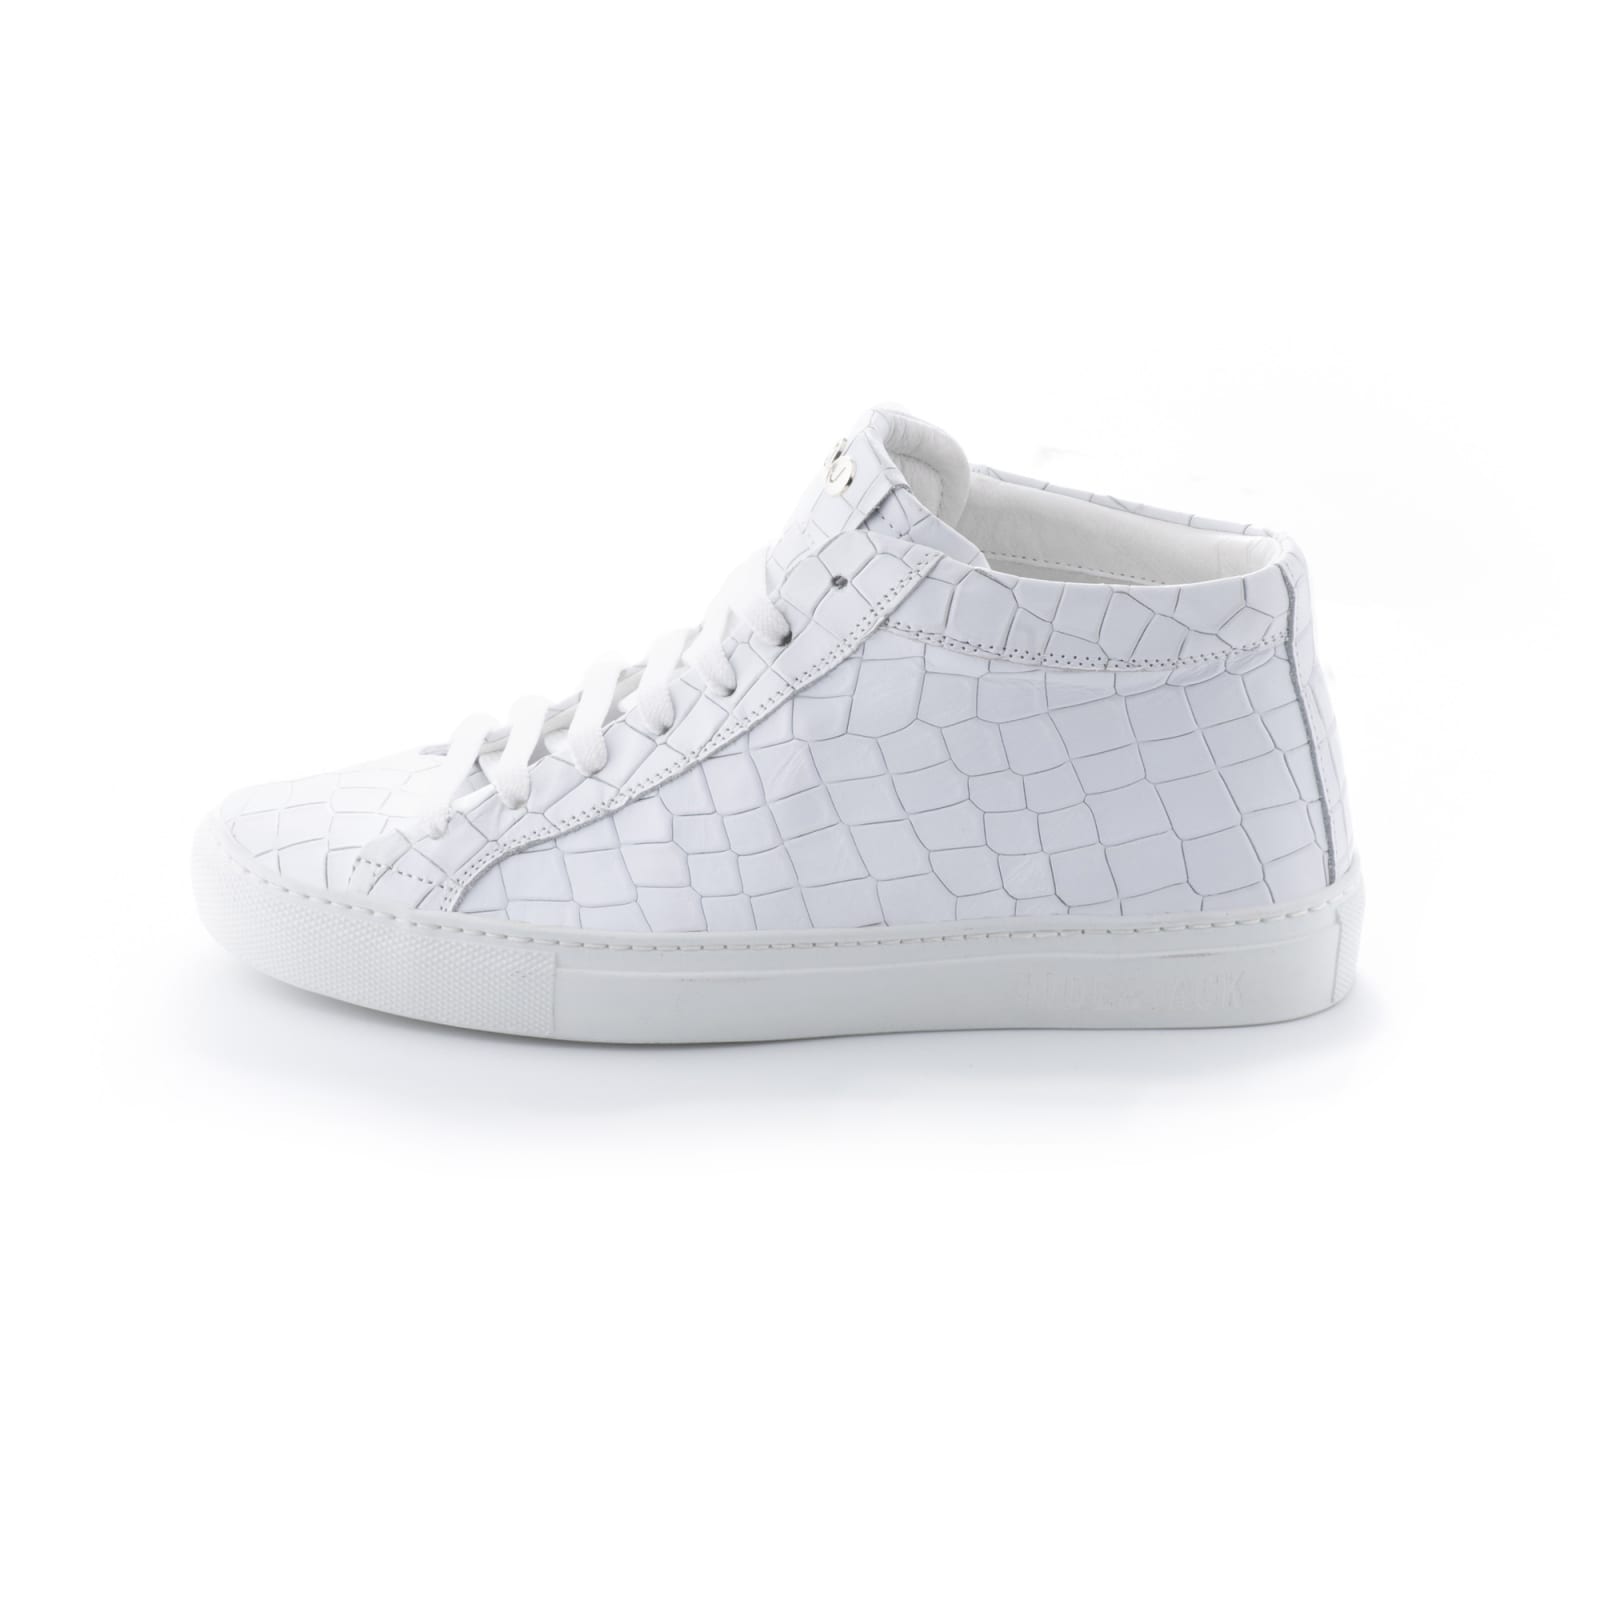 Hide & Jack Essence Total Leather Croco Printed White, White Sole